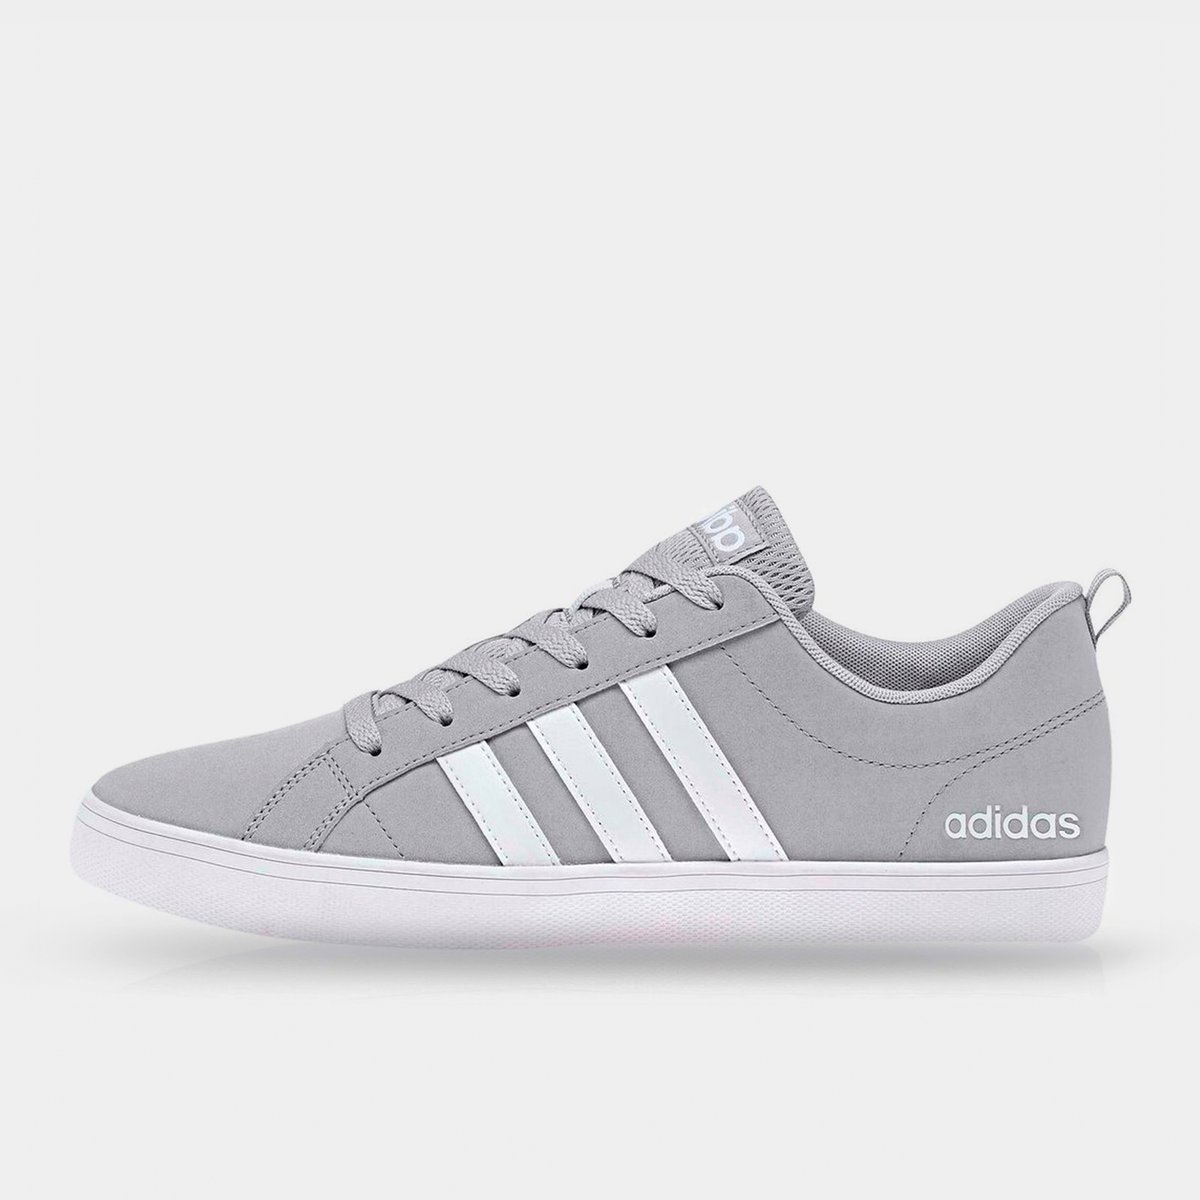 mens adidas pace vs trainers